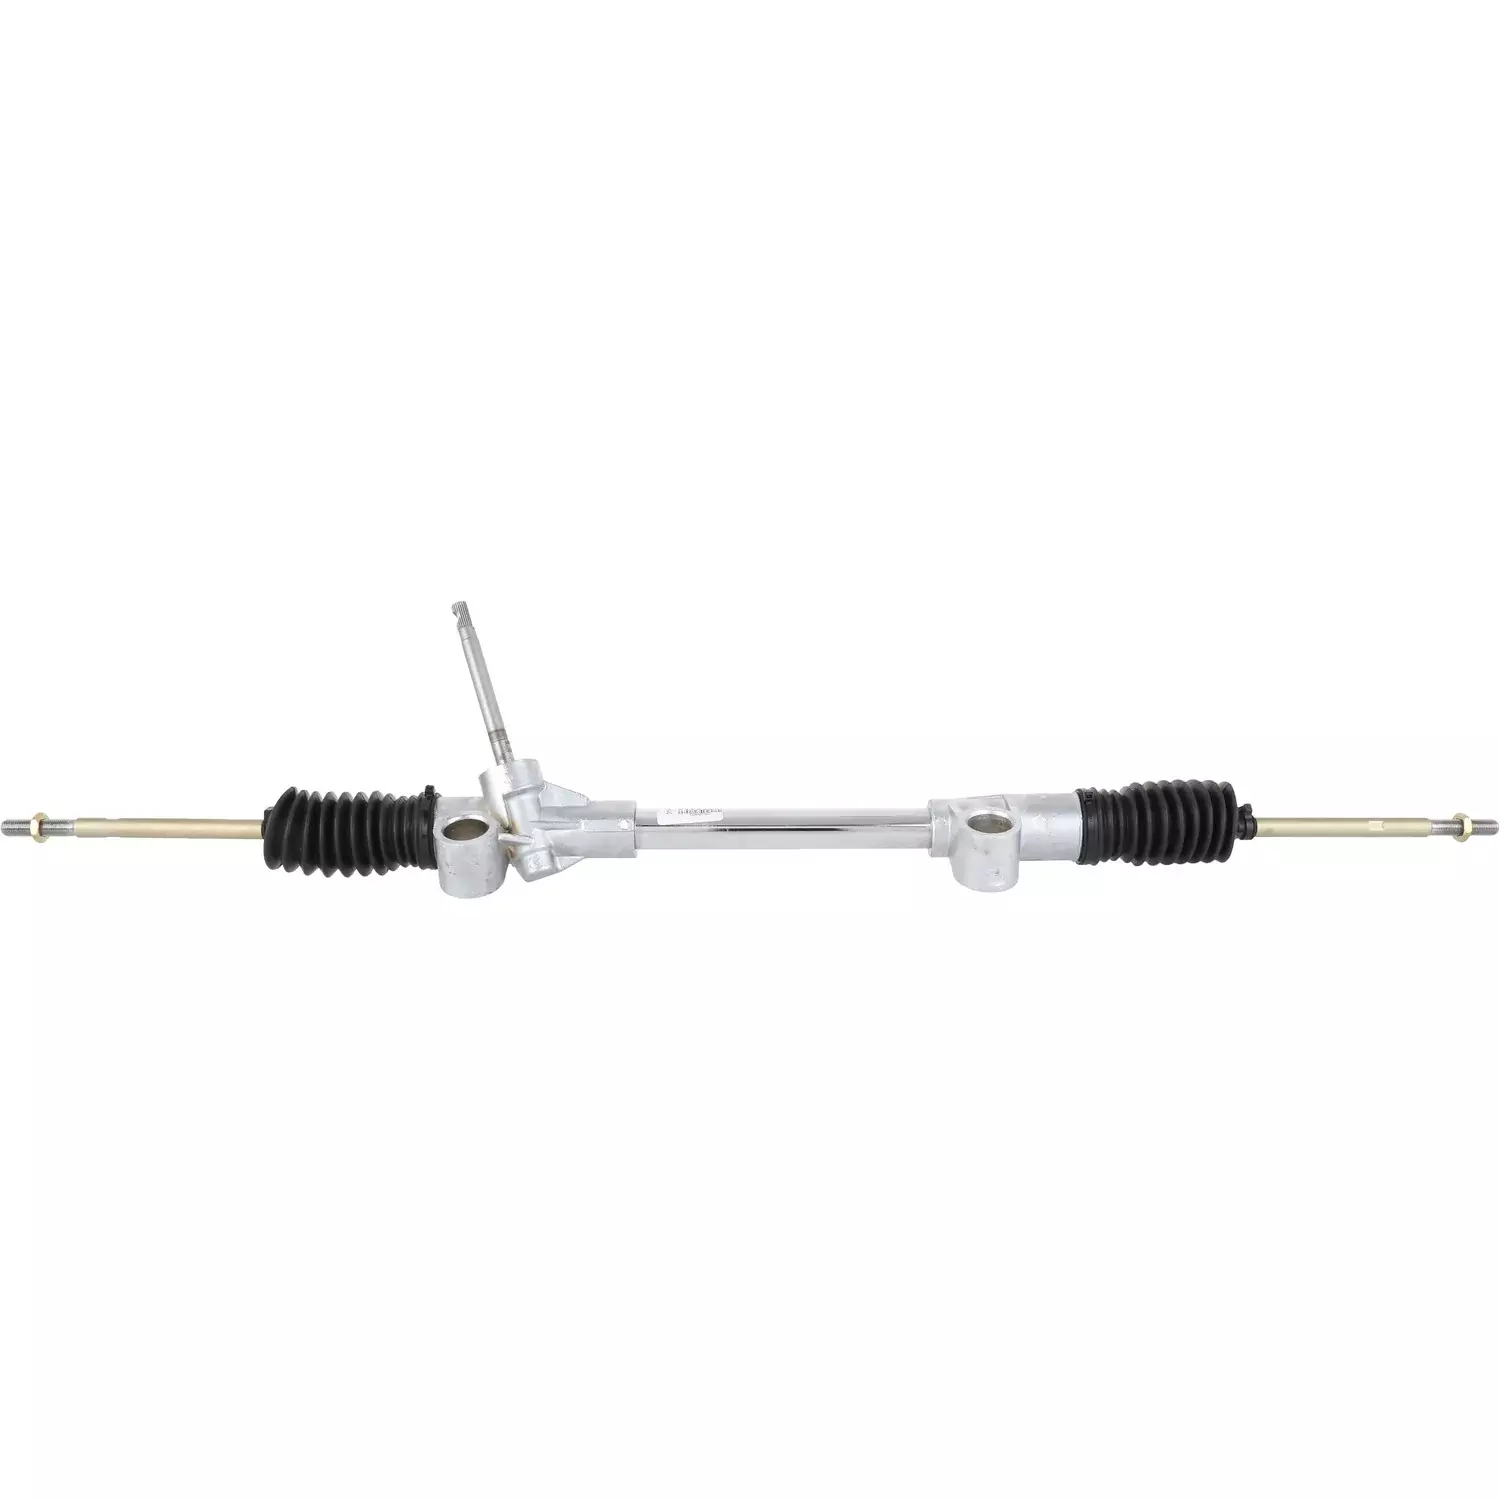 Unisteer Performance 8000580 Rack and Pinion, Quick Ratio, Manual, Aluminum, Natural, Ford Mustang 1994-2004, Each